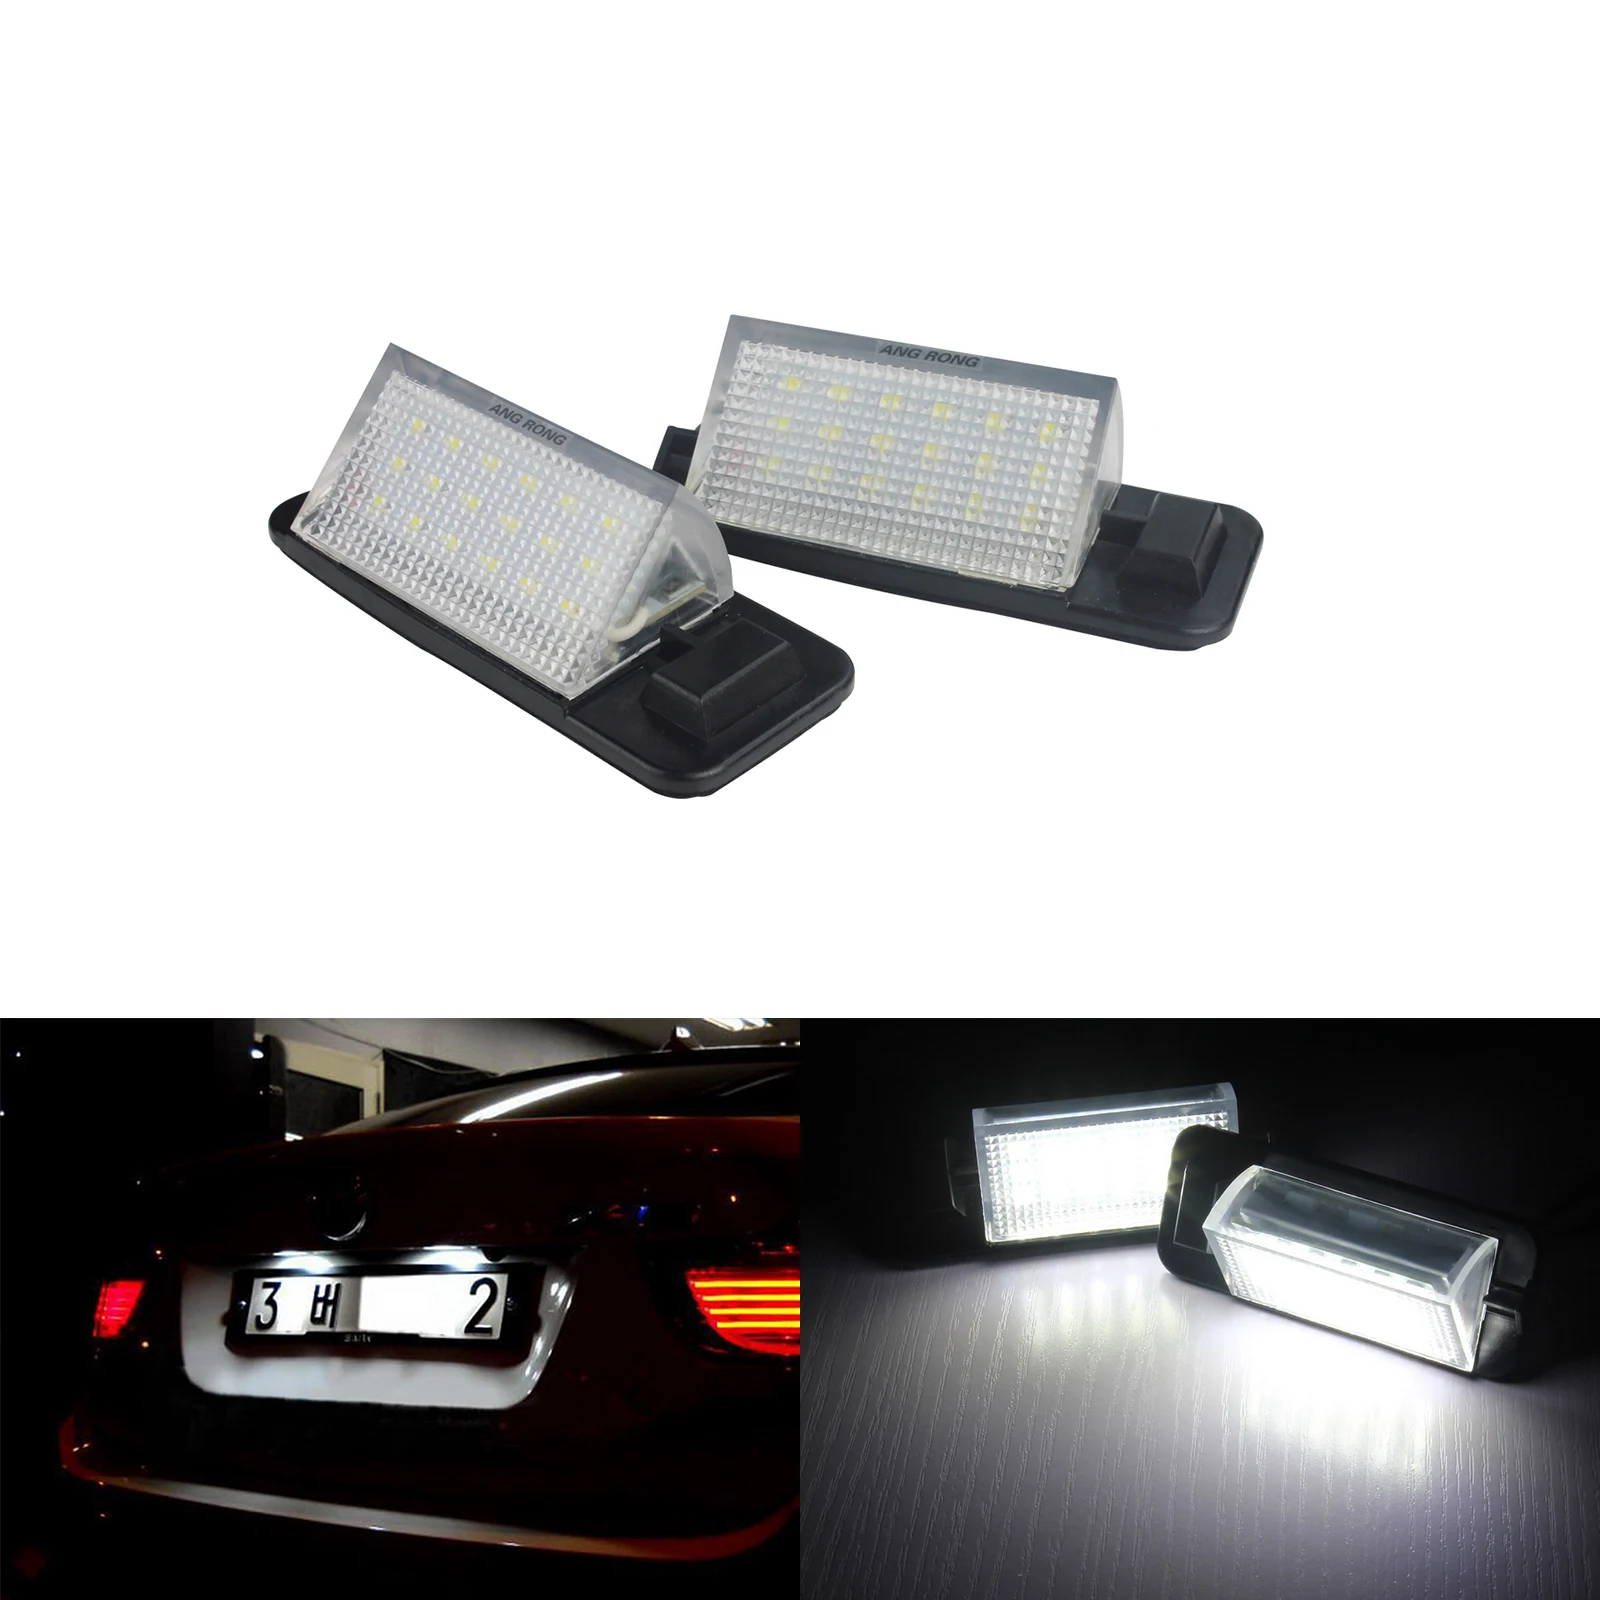 2x Fits BMW 3 Series E36 Bright Xenon White LED Number Plate Upgrade Light Bulbs 